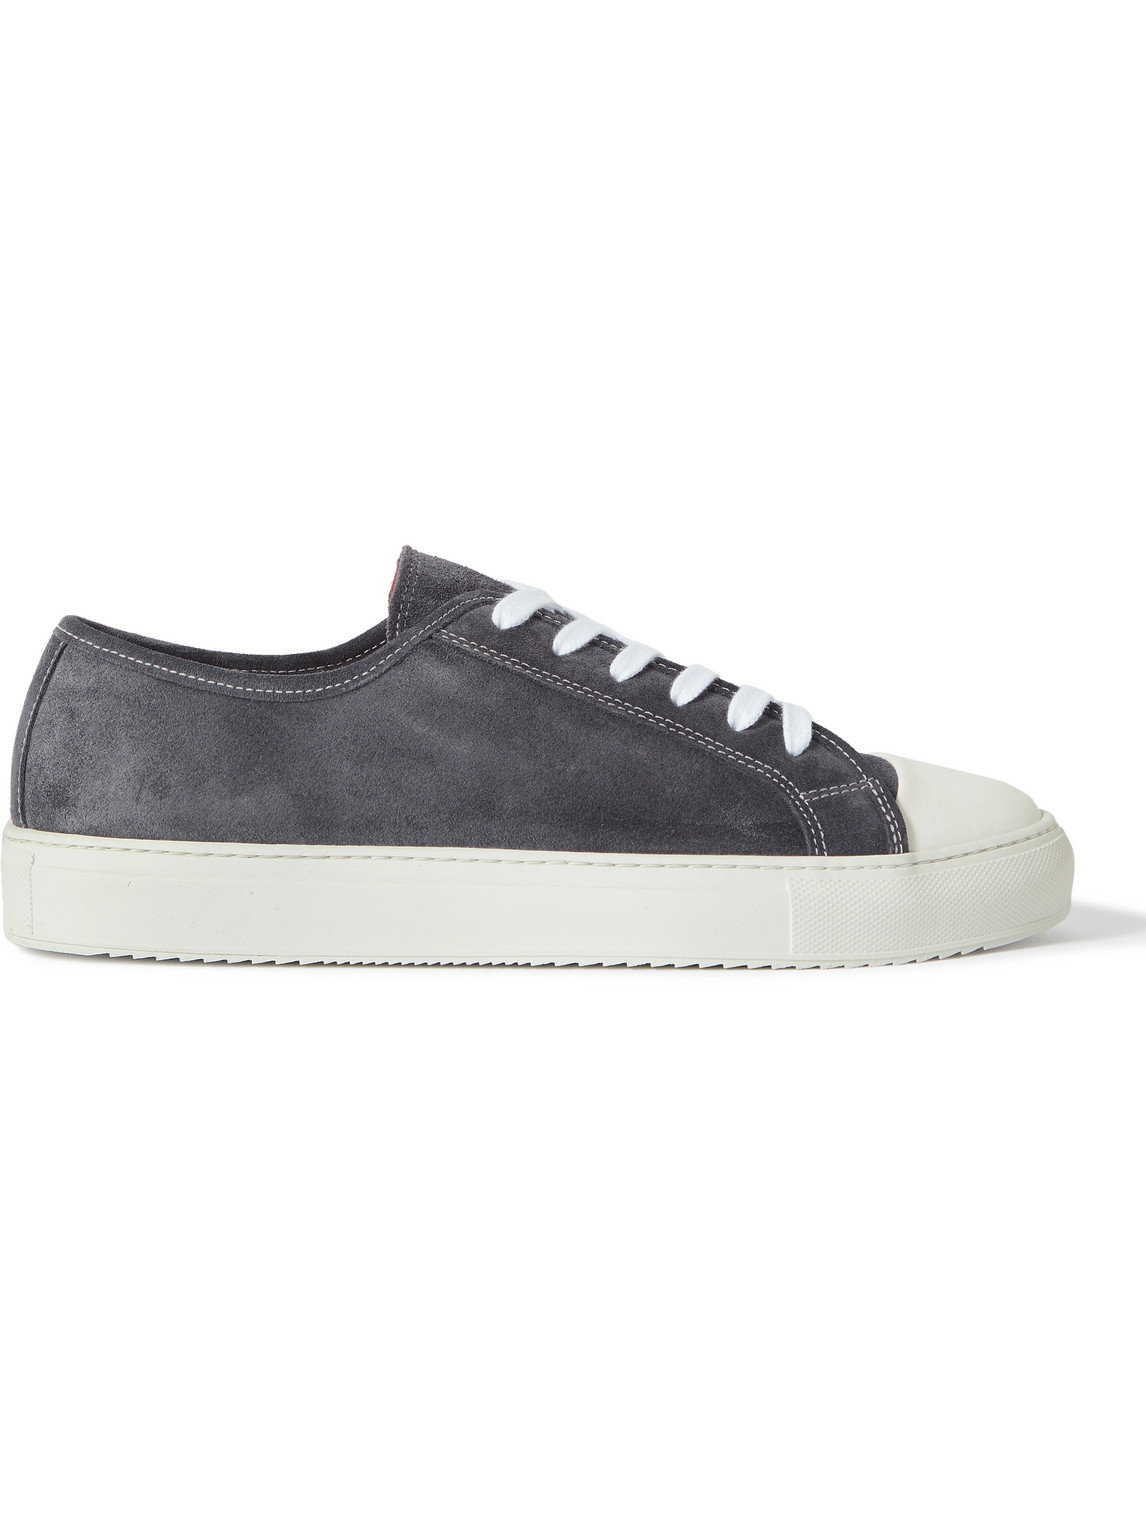 Mr P. Larry Regenerated Suede By Evolo® Sneakers In Blue